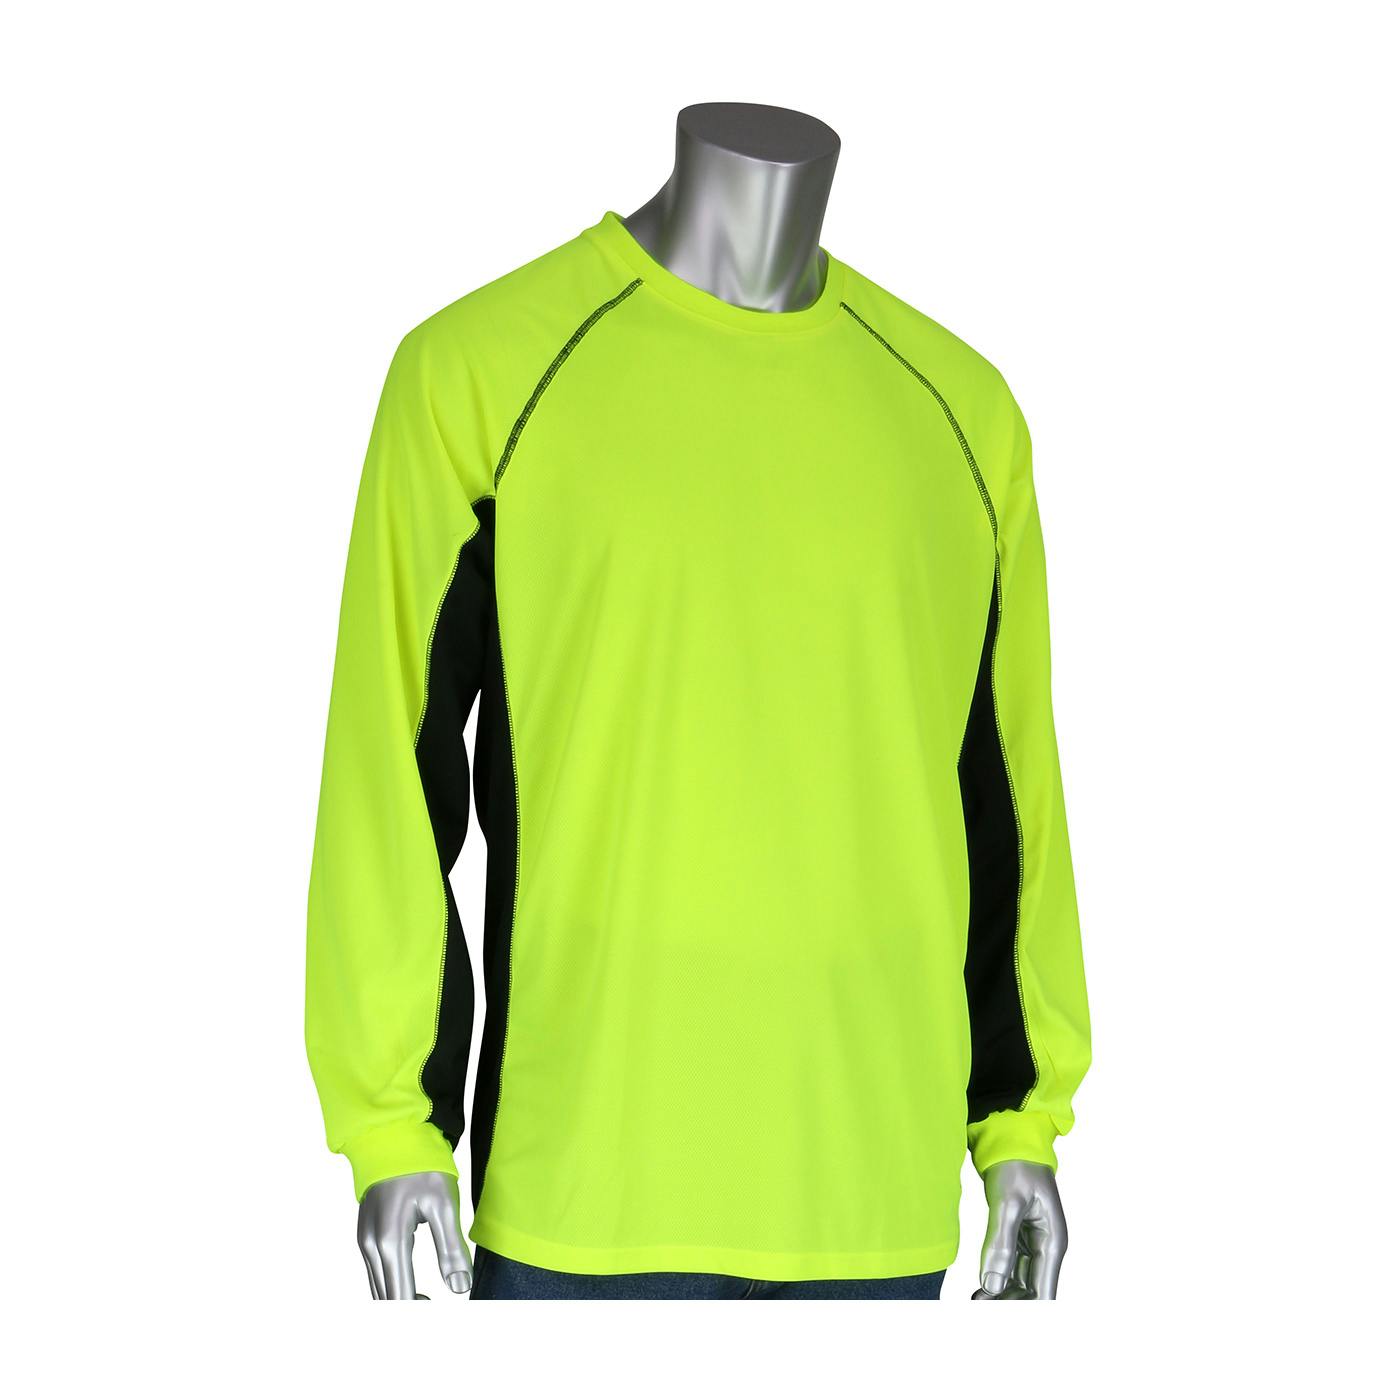 Non-ANSI Long Sleeve T-Shirt with 50+ UPF Sun Protection, Insect Repellent Treatment and Black Trim, Hi-Vis Yellow (310-1150B)_1